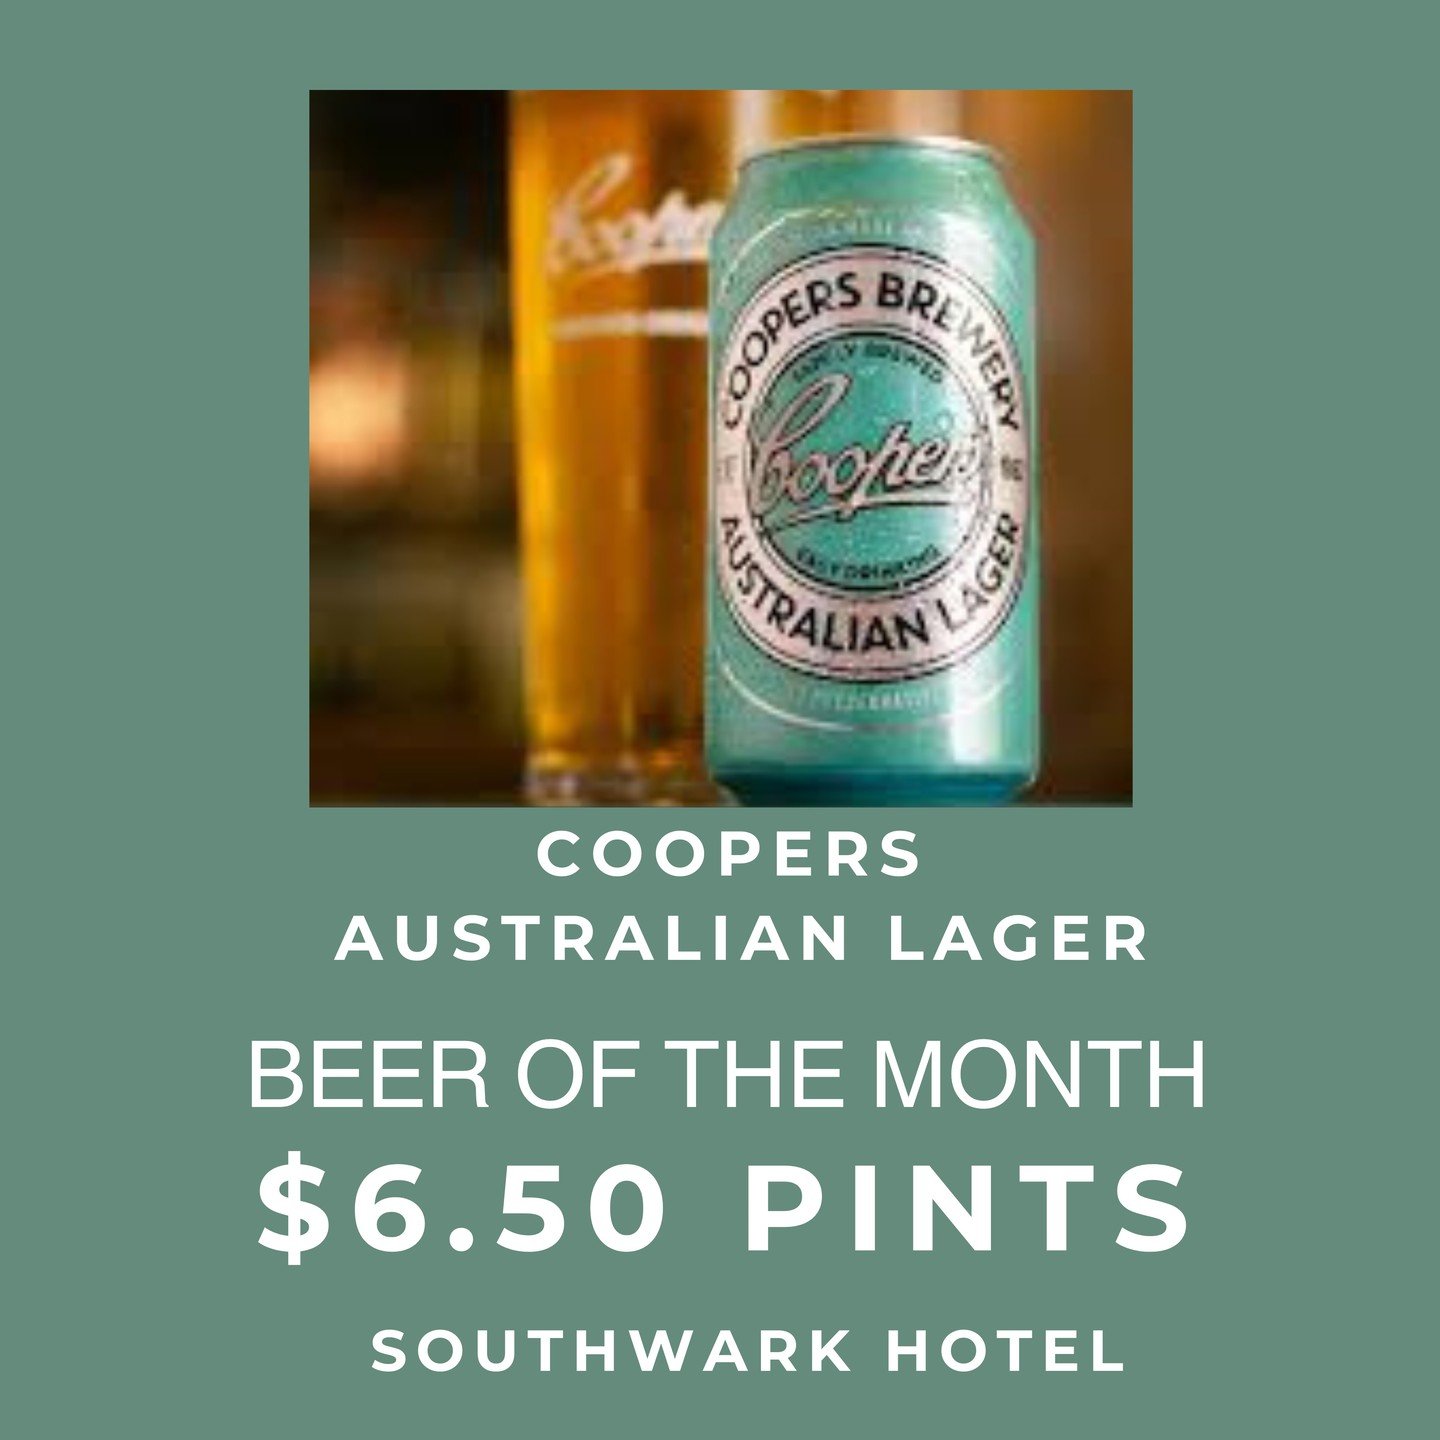 #southwarkhotel #southwarkpub #coopers #australianlager #beerofthemonth #beer #pubs #adelaidepubs #publife #familyrun #supportyourlocal